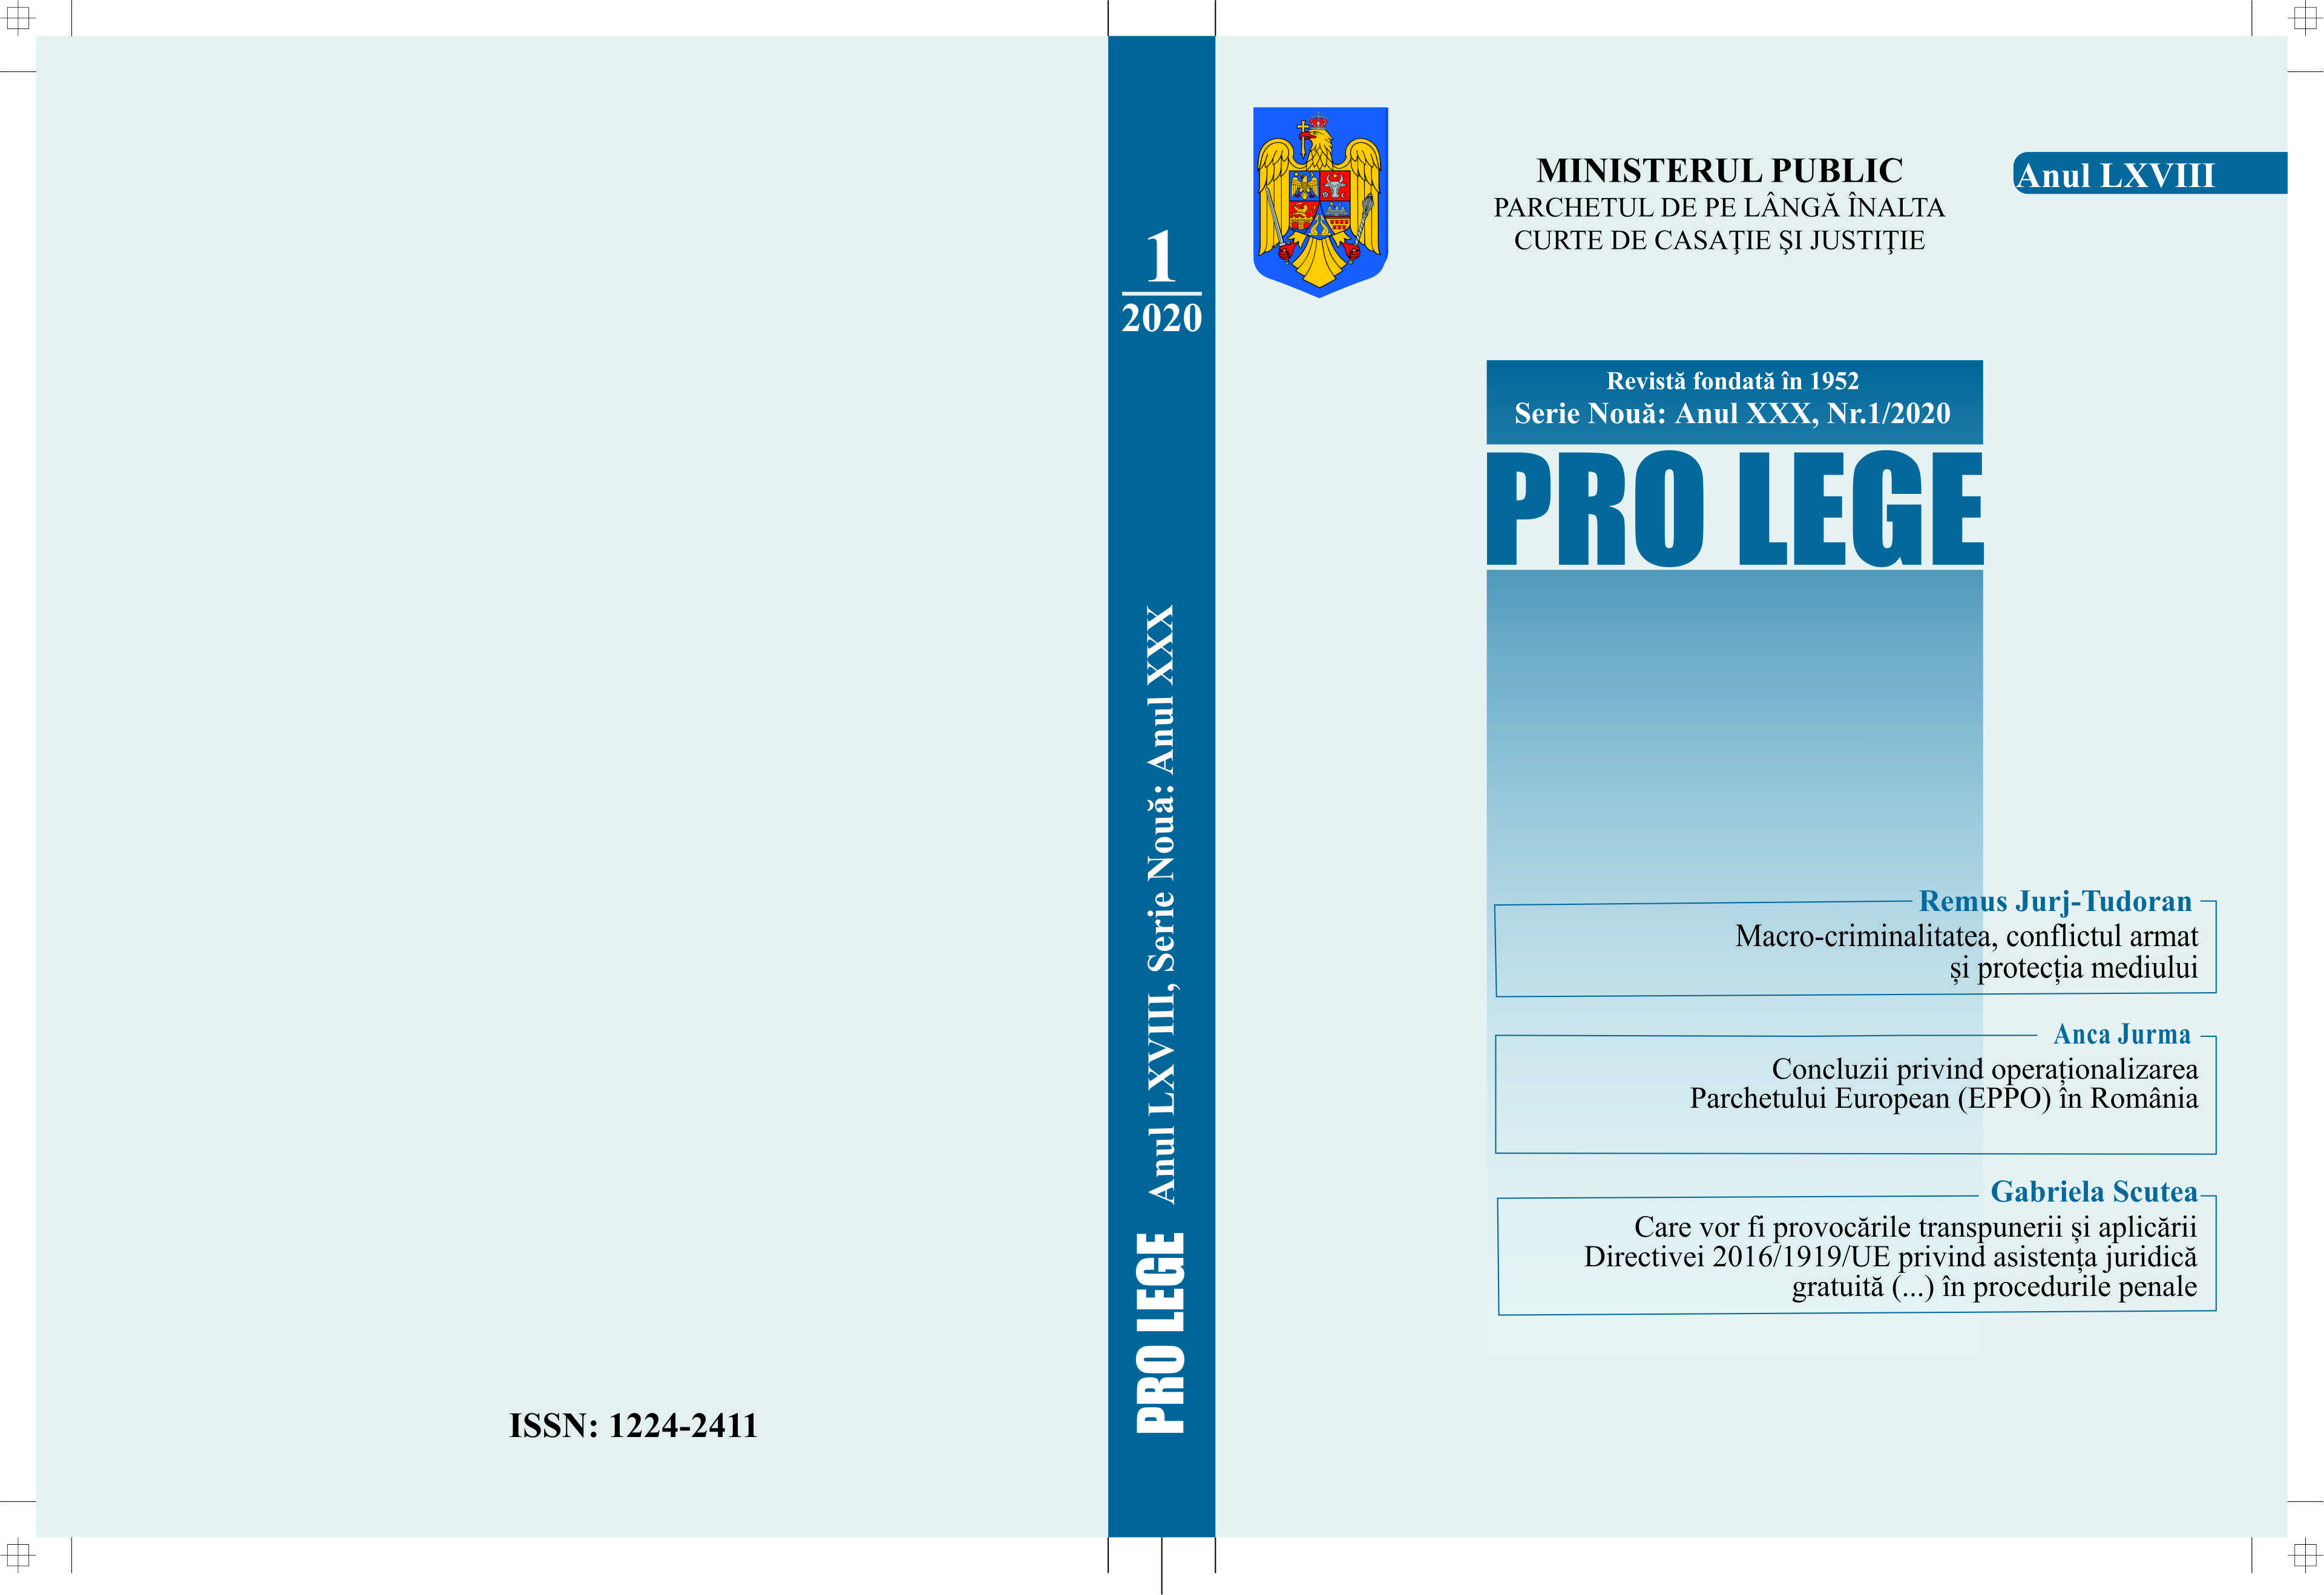 Judgment of the Court of Justice of the European Union (First Chamber) in the Case C-627/19 PPU, of December 12, 2019 Cover Image